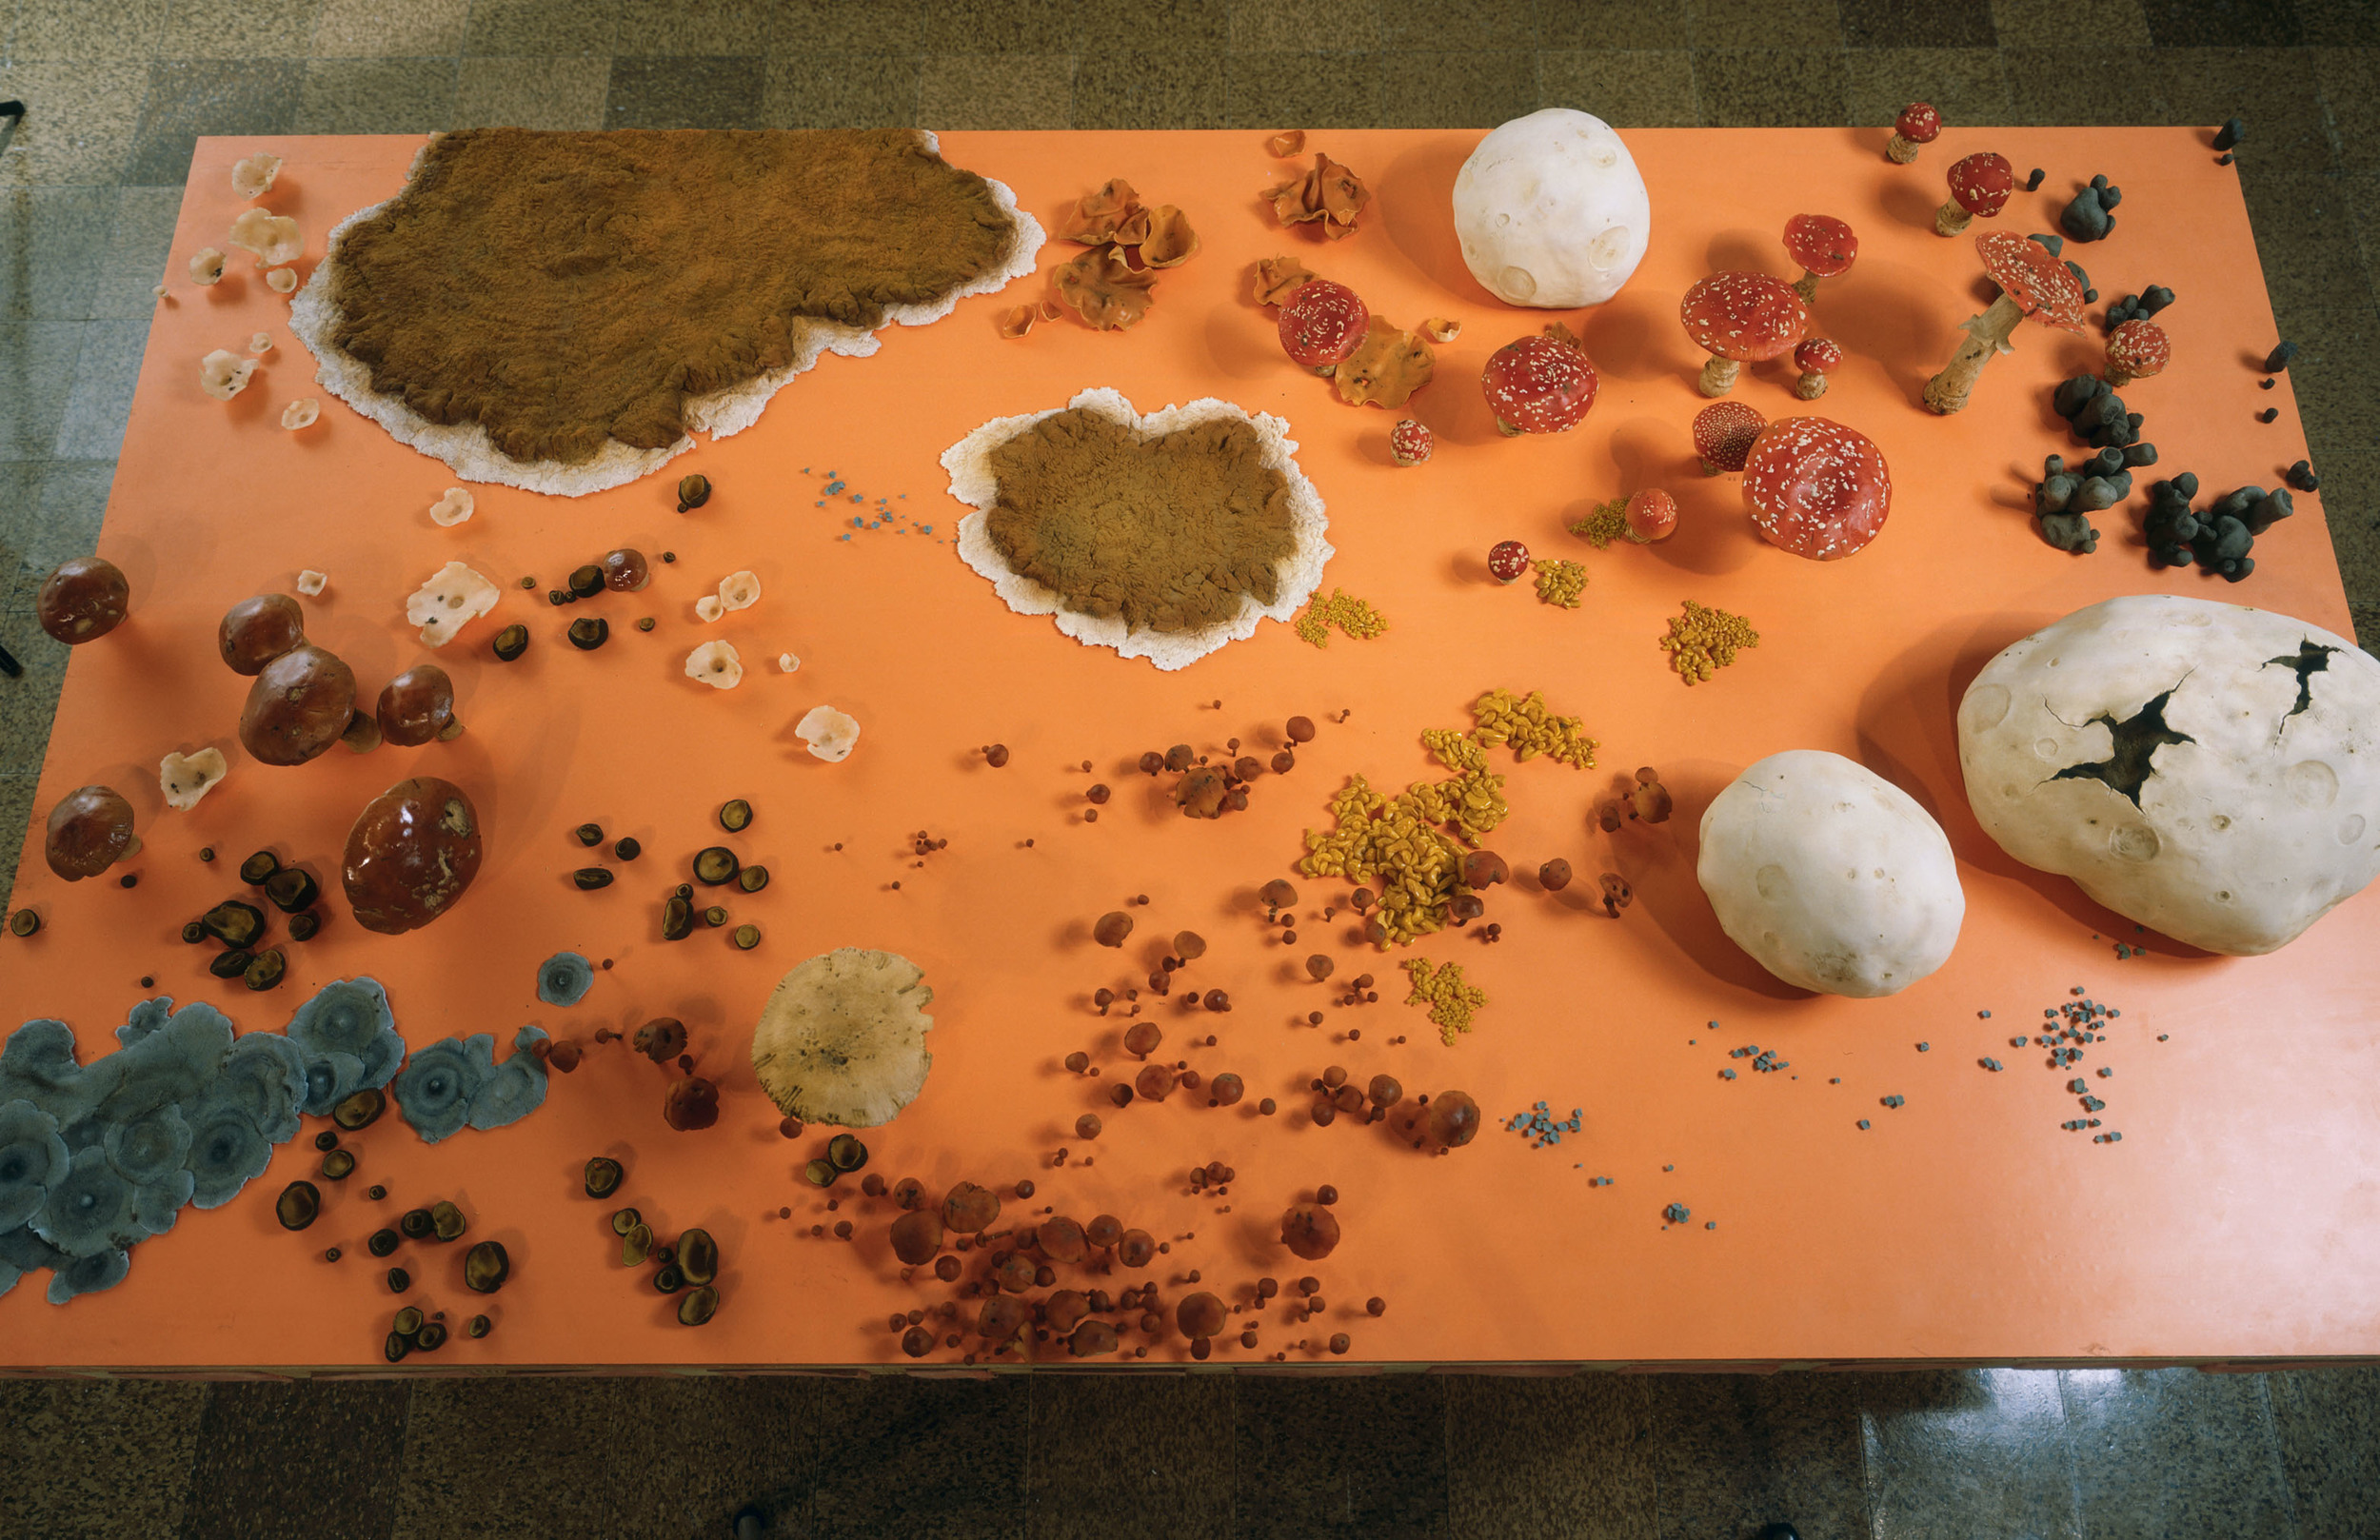  Fungus Formica Field, 1998, Wood, fiberglass insulation, polymer, oil, lacquer, linoleum, and formica, 48 x 83 x 15 inches 